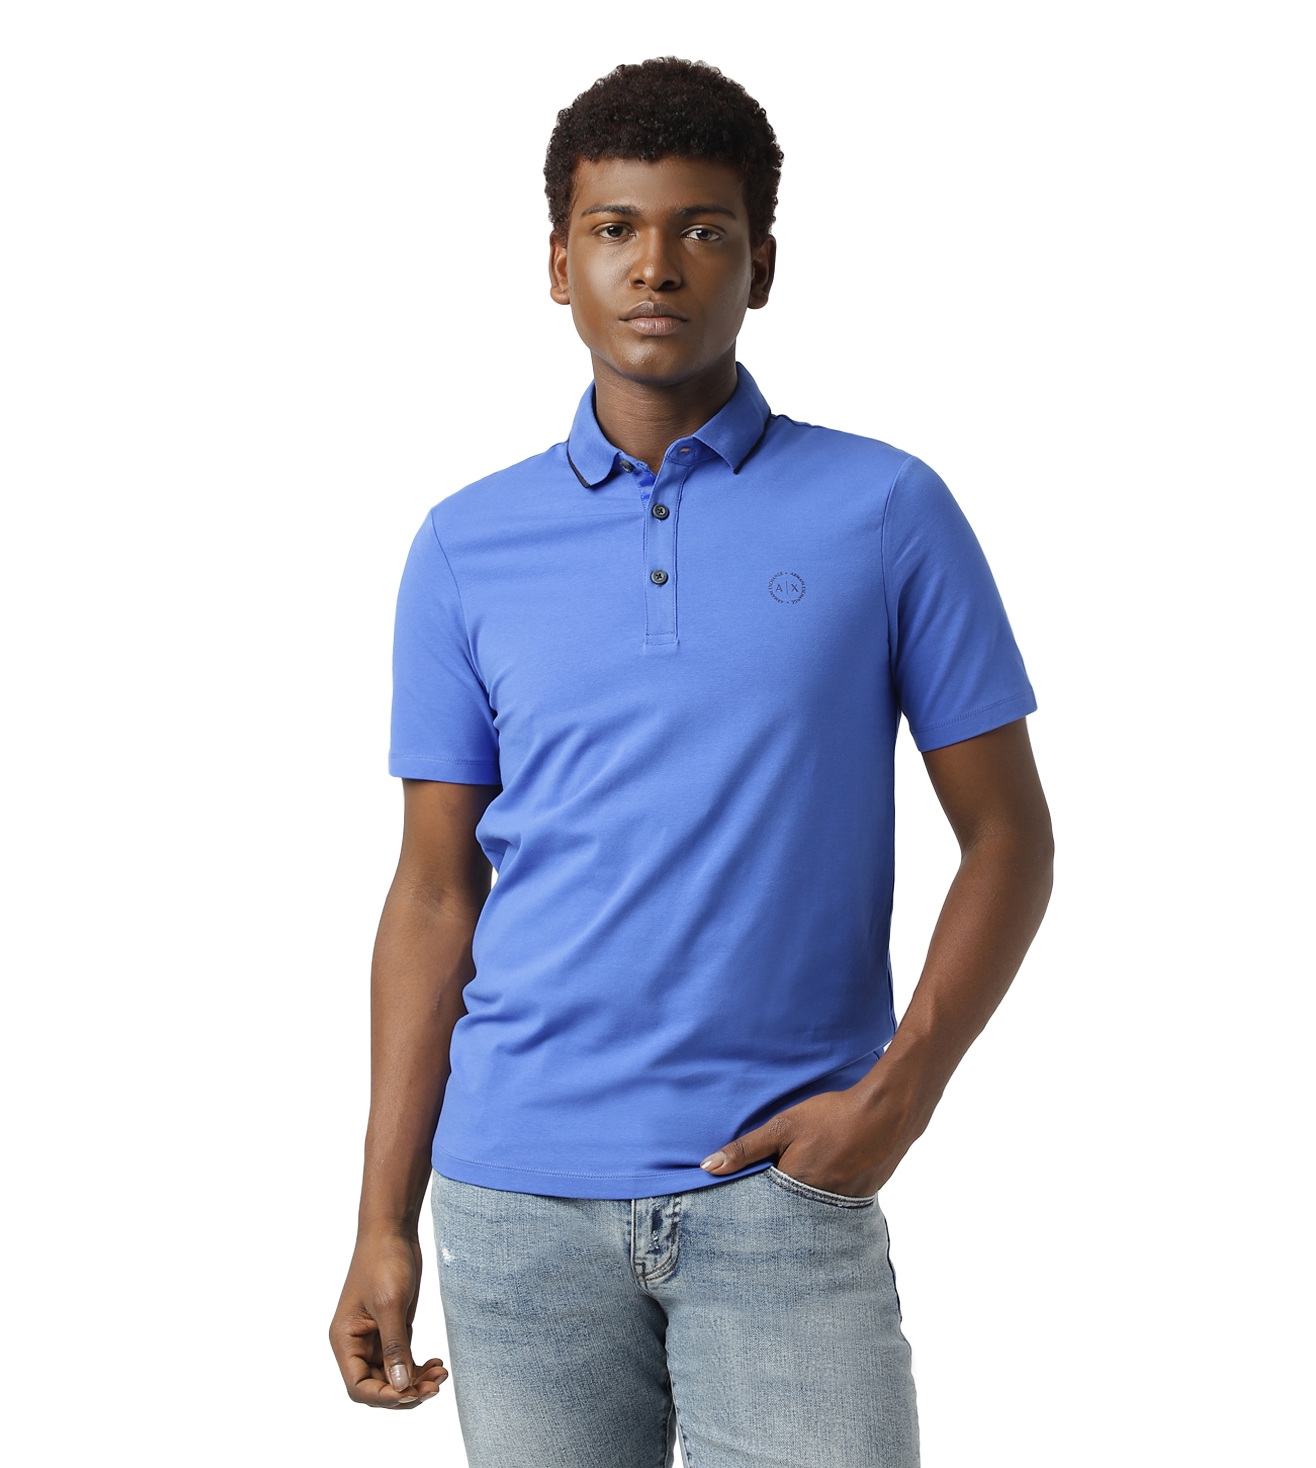 Circular Logo Slim Fit Stretchable Polo T-Shirt with Contrast Hems